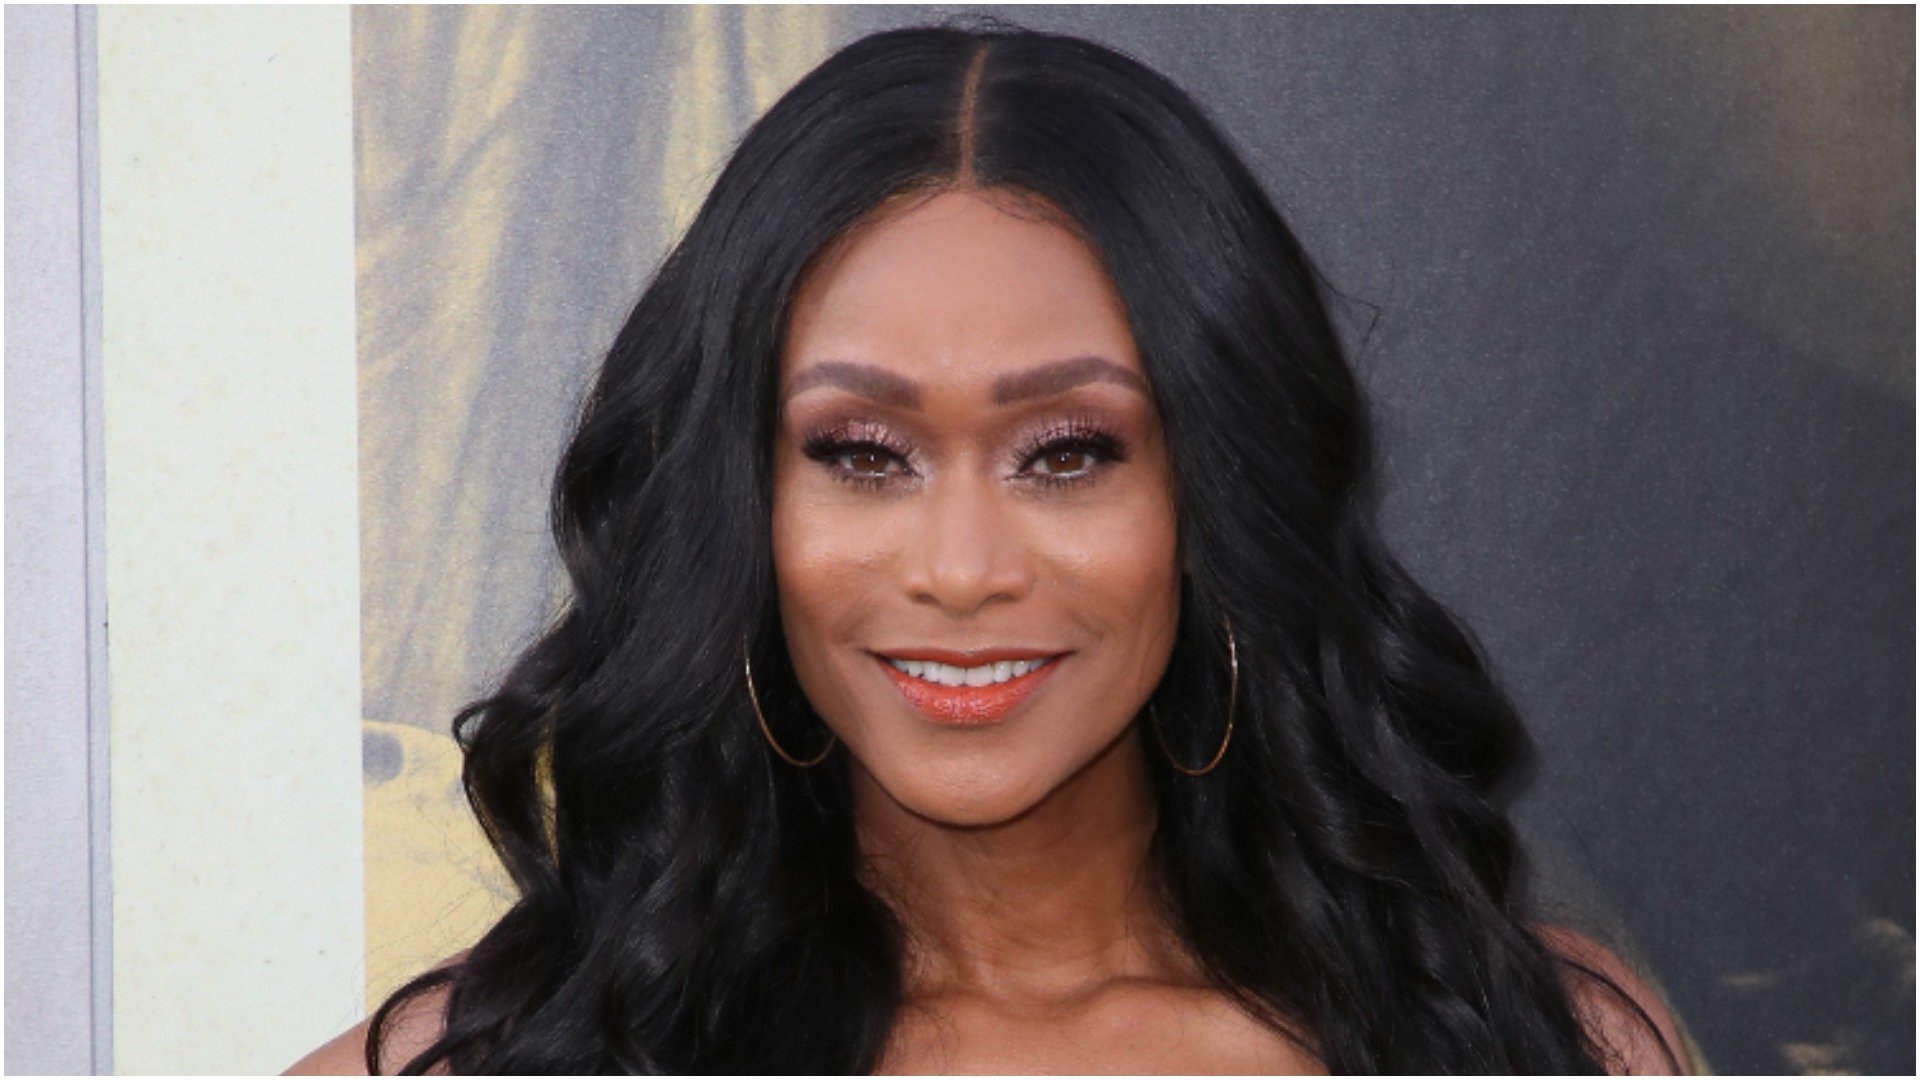 Tami Roman from The Real World Homecoming: Los Angeles at the premiere of The Kitchen